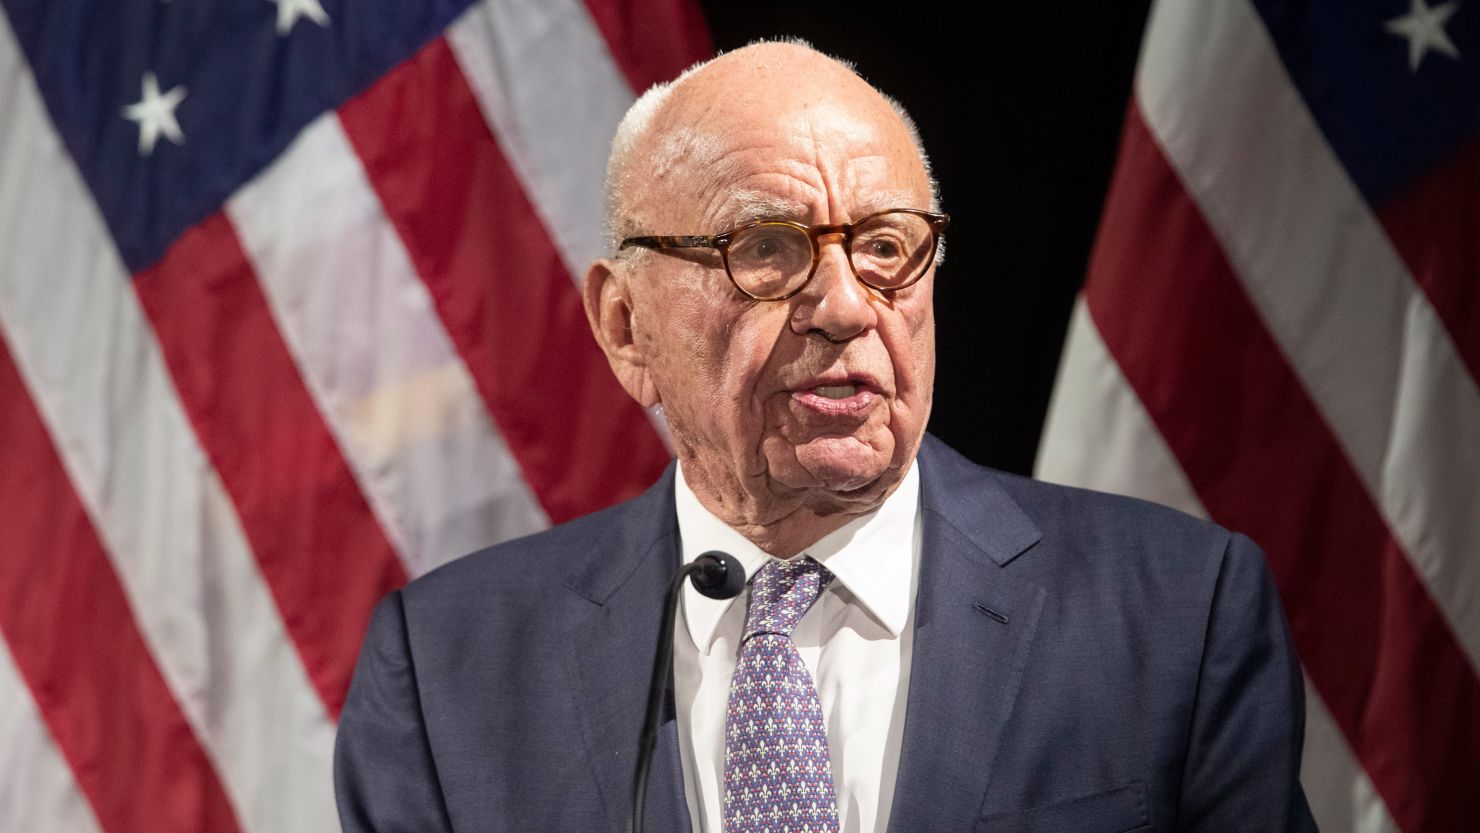 FILE - Rupert Murdoch introduces Secretary of State Mike Pompeo during the Herman Kahn Award Gala, in New York, Oct. 30, 2018. The media magnate is stepping down as chairman of News Corp. and Fox Corp., the companies that he built into forces over the last 50 years. He will become chairman emeritus of both corporations, the company announced on Thursday. His son, Lachlan, will control both companies. (AP Photo/Mary Altaffer, File)